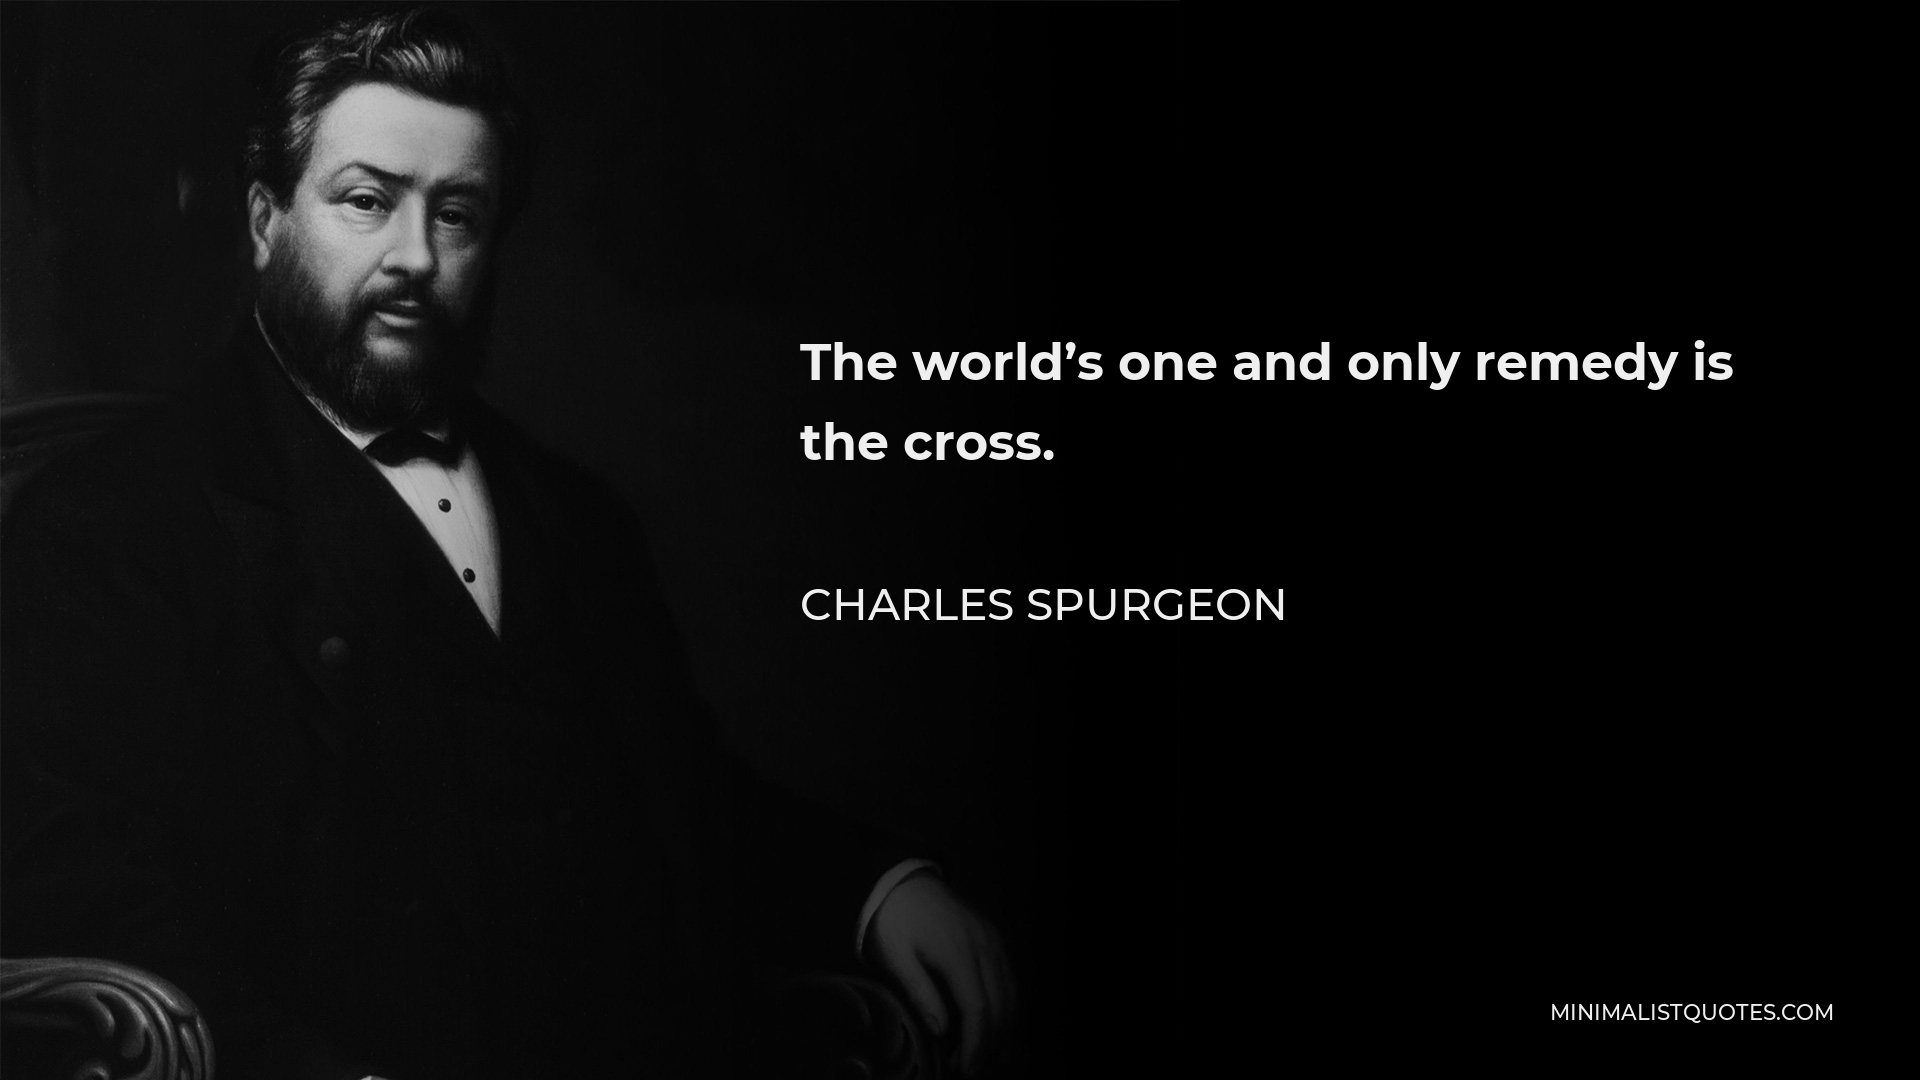 Charles Spurgeon Quote - The world’s one and only remedy is the cross.